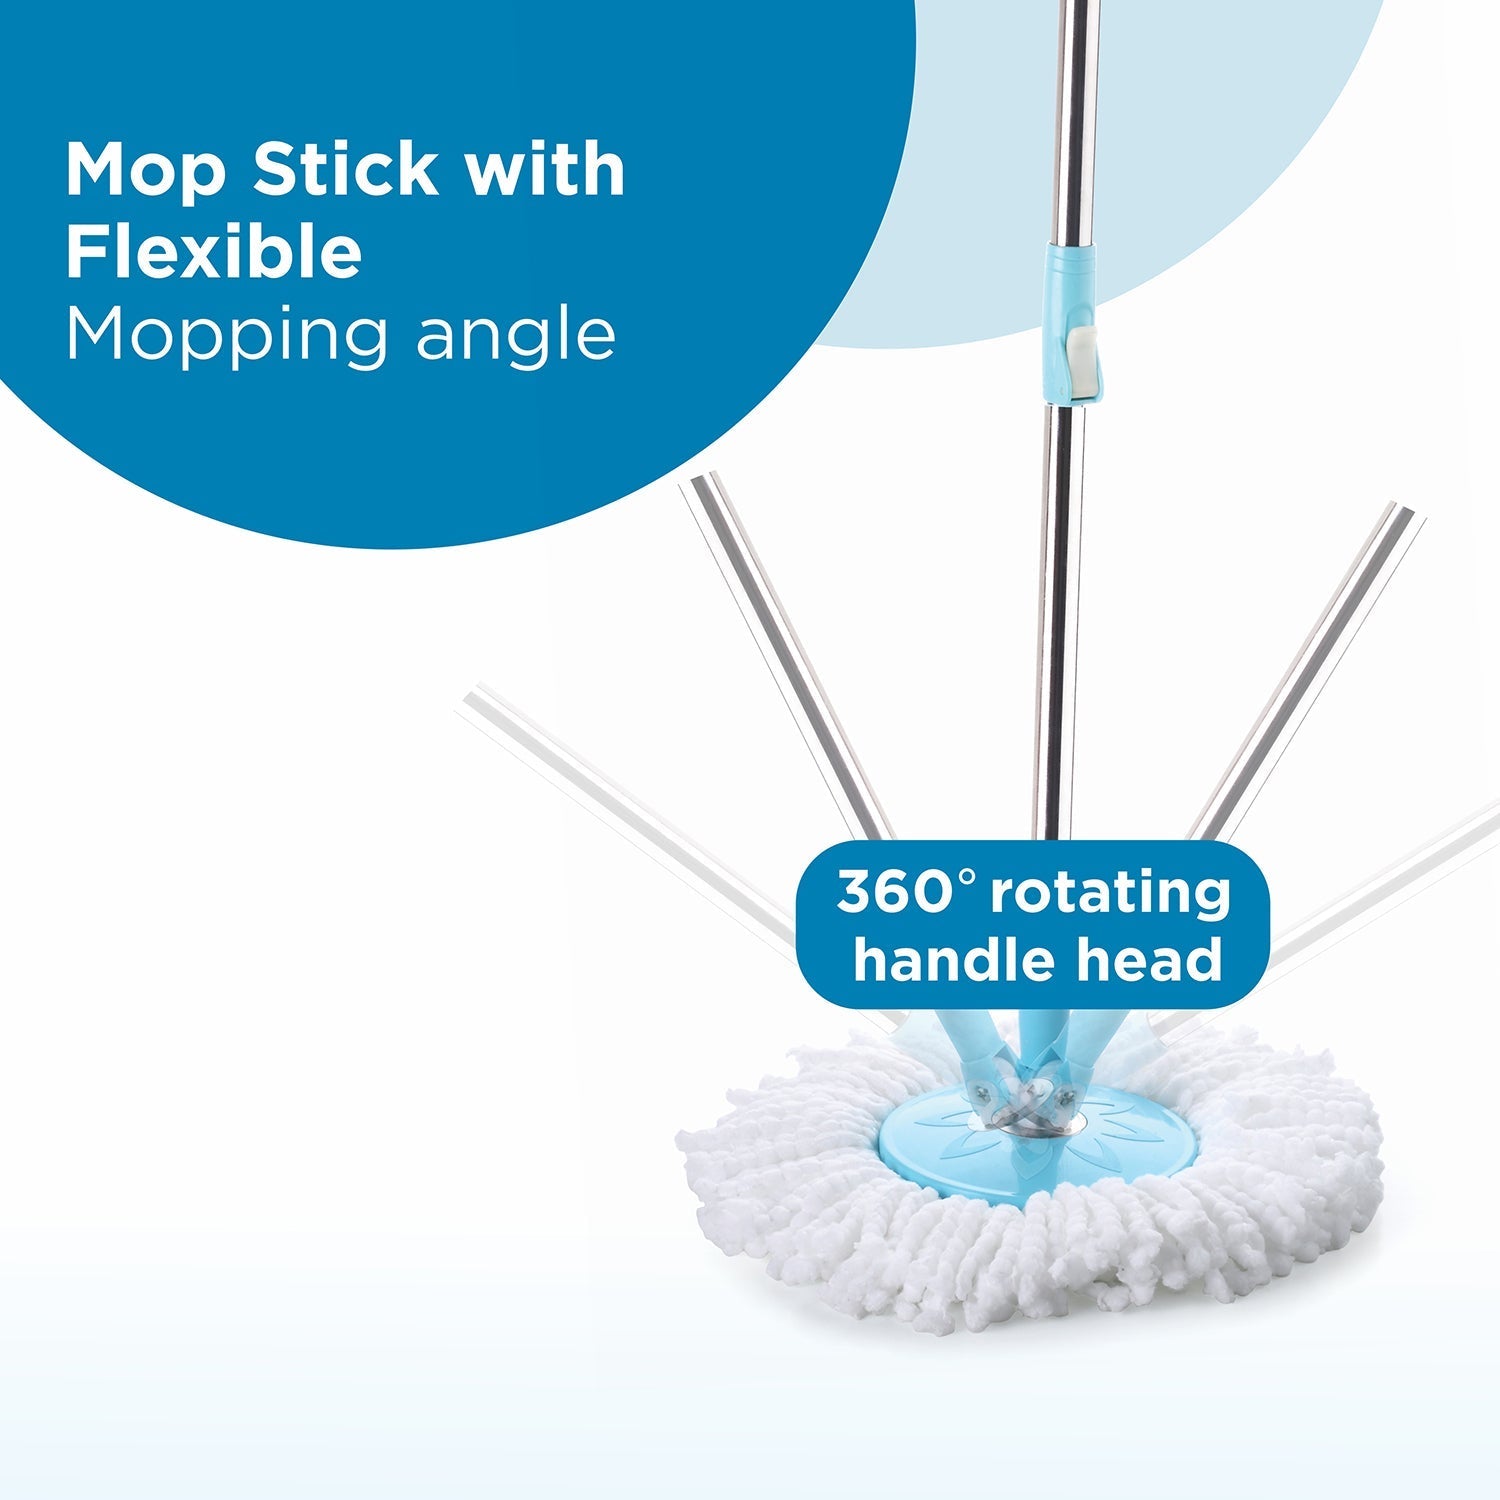 8713 GANESH Prime Plus Steel Spinner Bucket Mop 360 Degree Self Spin Wringing with 2 Absorbers for Home and Office Floor Cleaning Mops Set. 